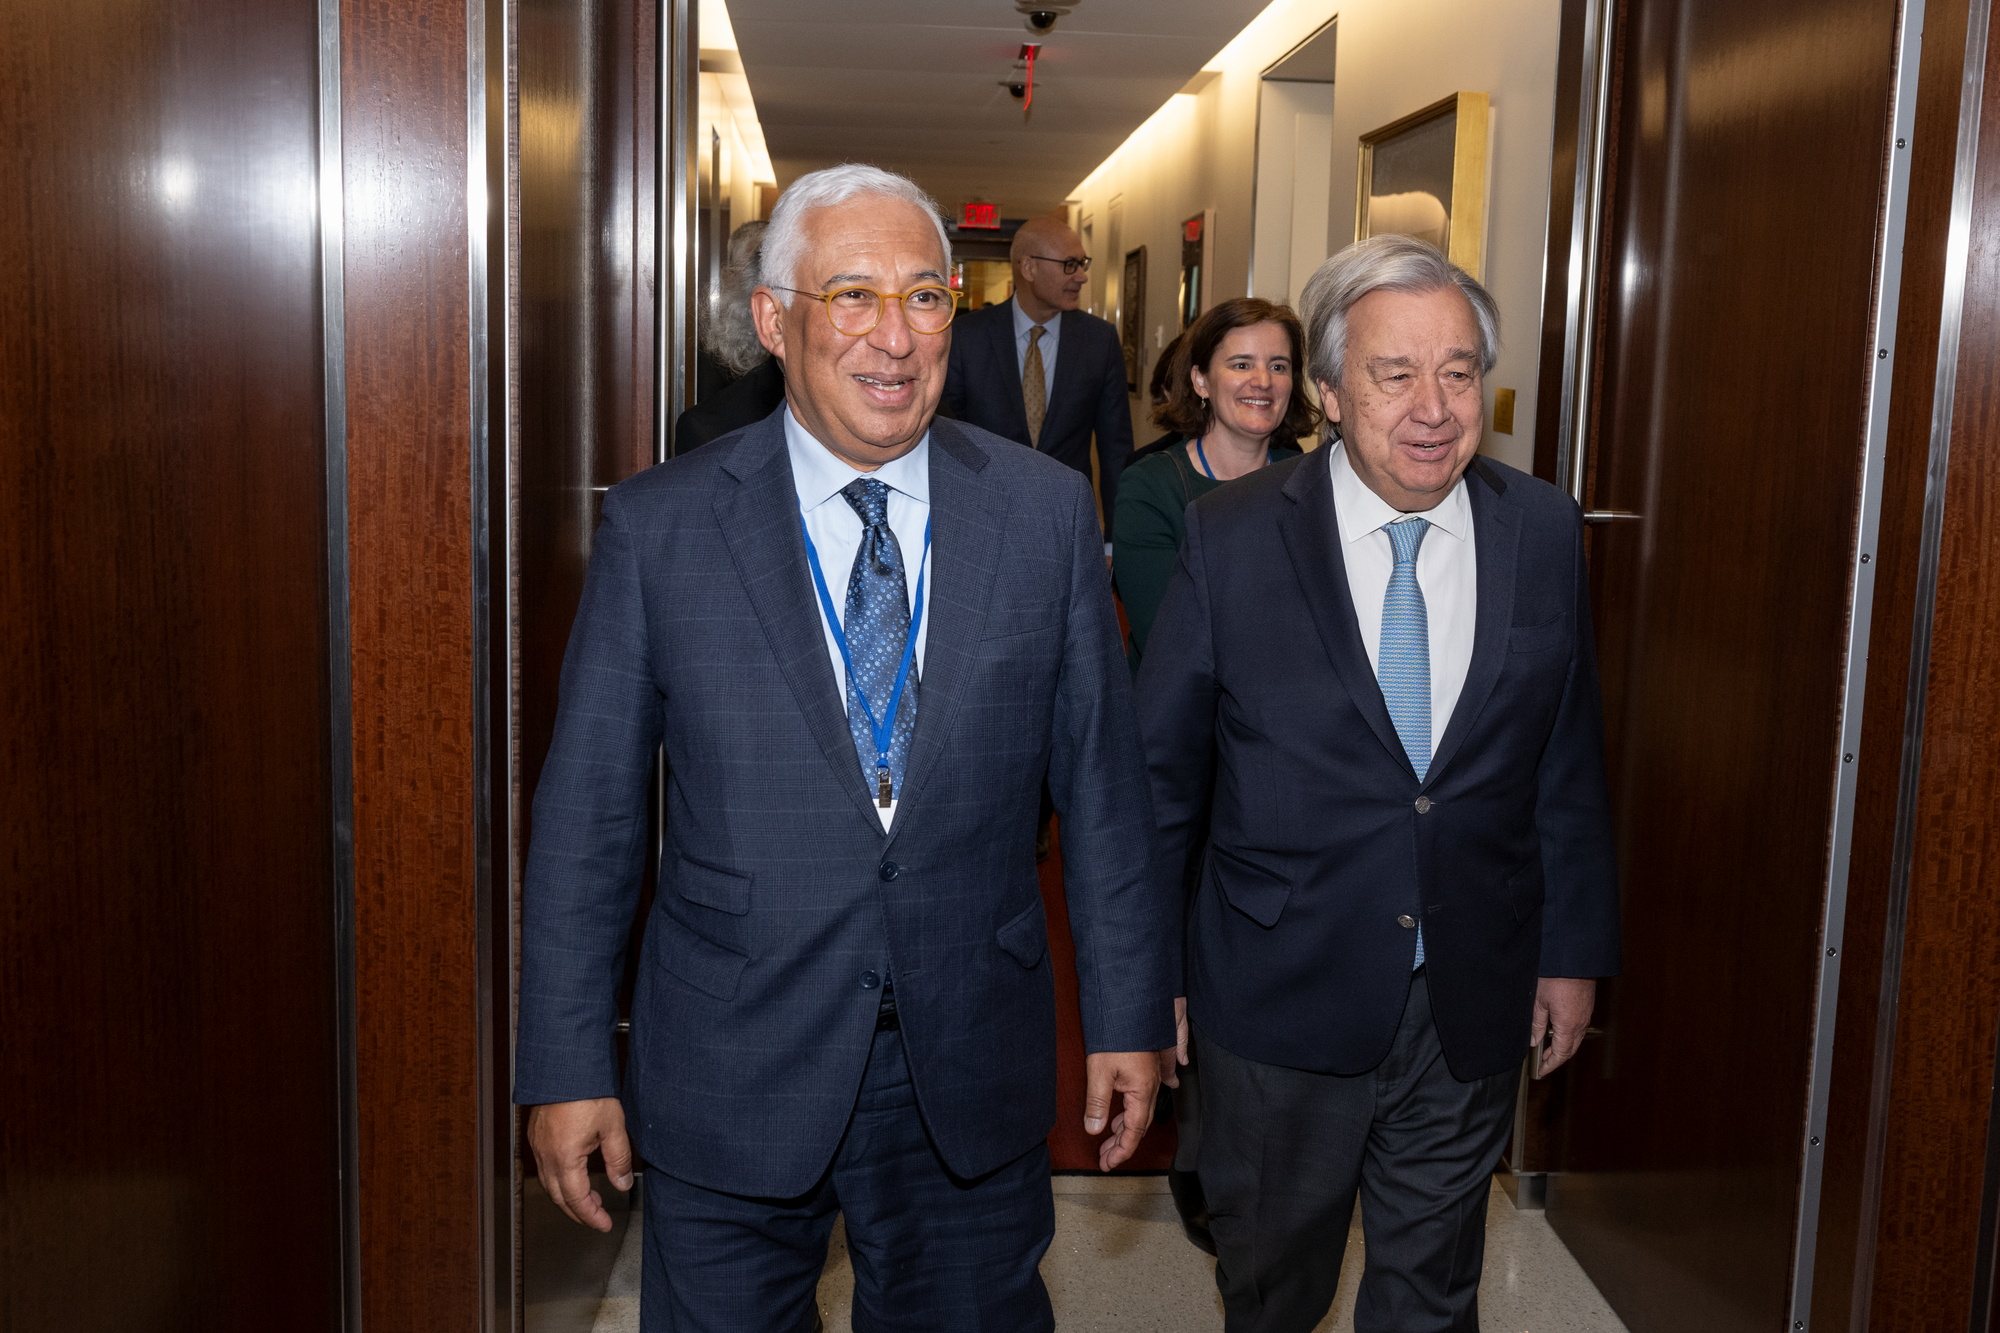 epa11230139 A handout photo made available by United Nations shows United Nations Secretary-General Antonio Guterres (R) meets with the Prime Minister of Portugal Antonio Costa (L) ahead of an inaugural handover ceremony of a gift to the United Nations from Portugal at UN Headquarters in New York, New York, USA, 18 March 2024  EPA/ESKINDER DEBEBE / UNITED NATIONS / HANDOUT   HANDOUT EDITORIAL USE ONLY/NO SALES HANDOUT EDITORIAL USE ONLY/NO SALES